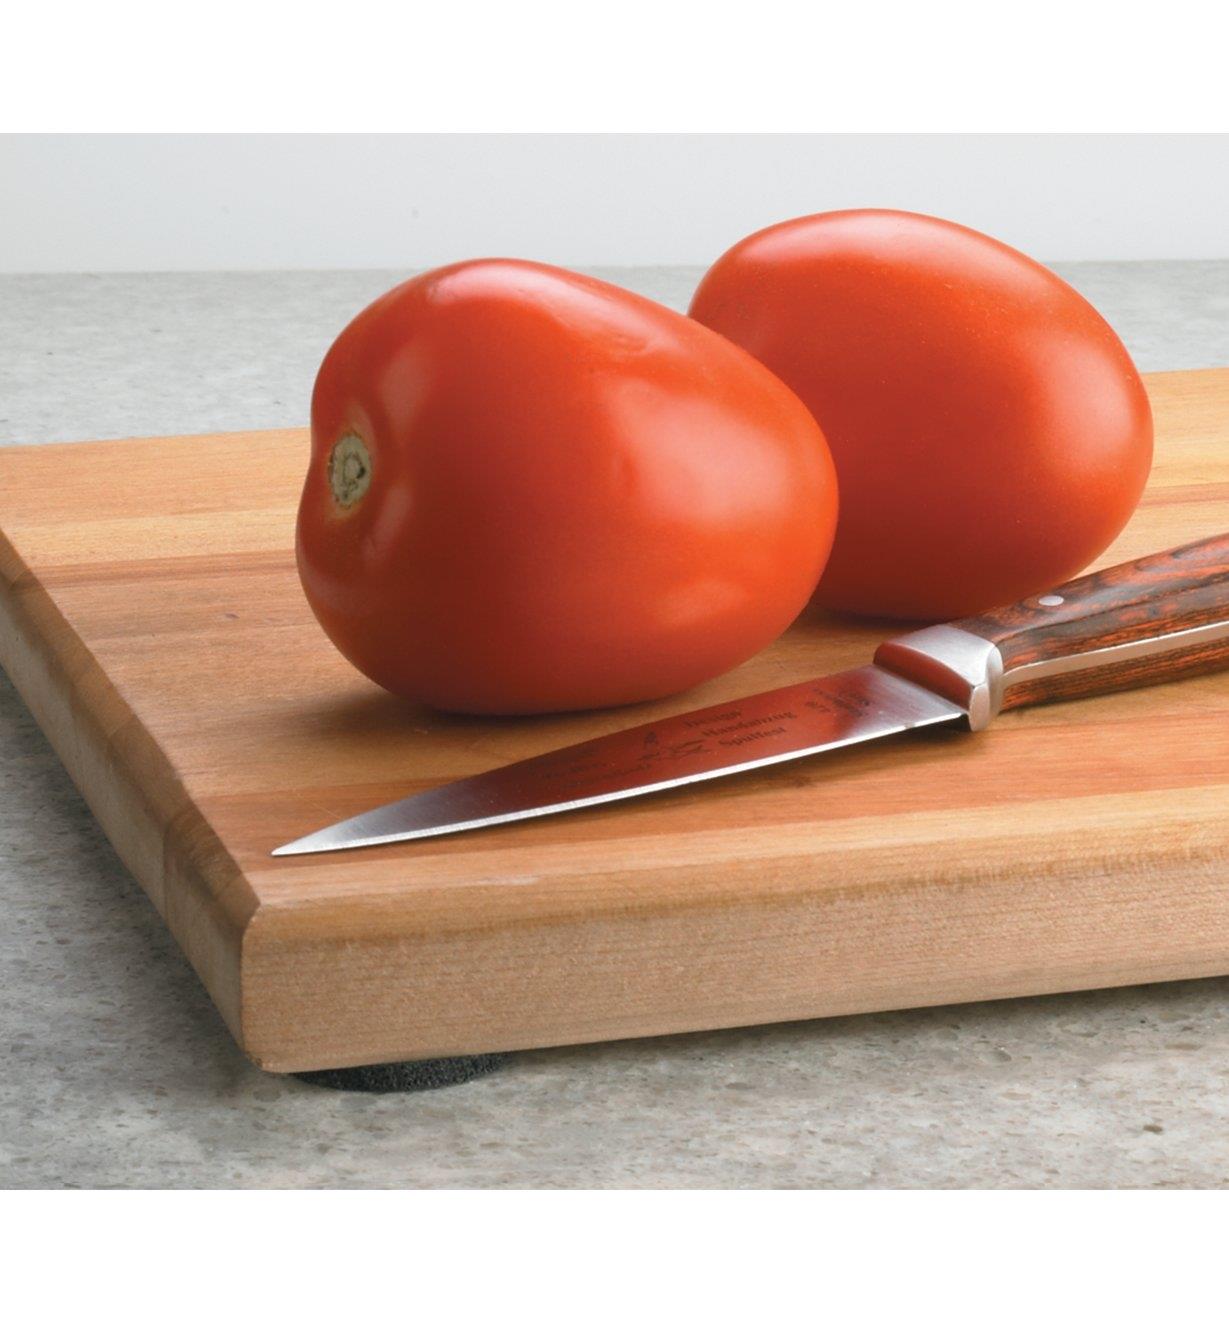 High-Friction Grip Discs applied to the underside of a cutting board, with tomatoes and a knife on top